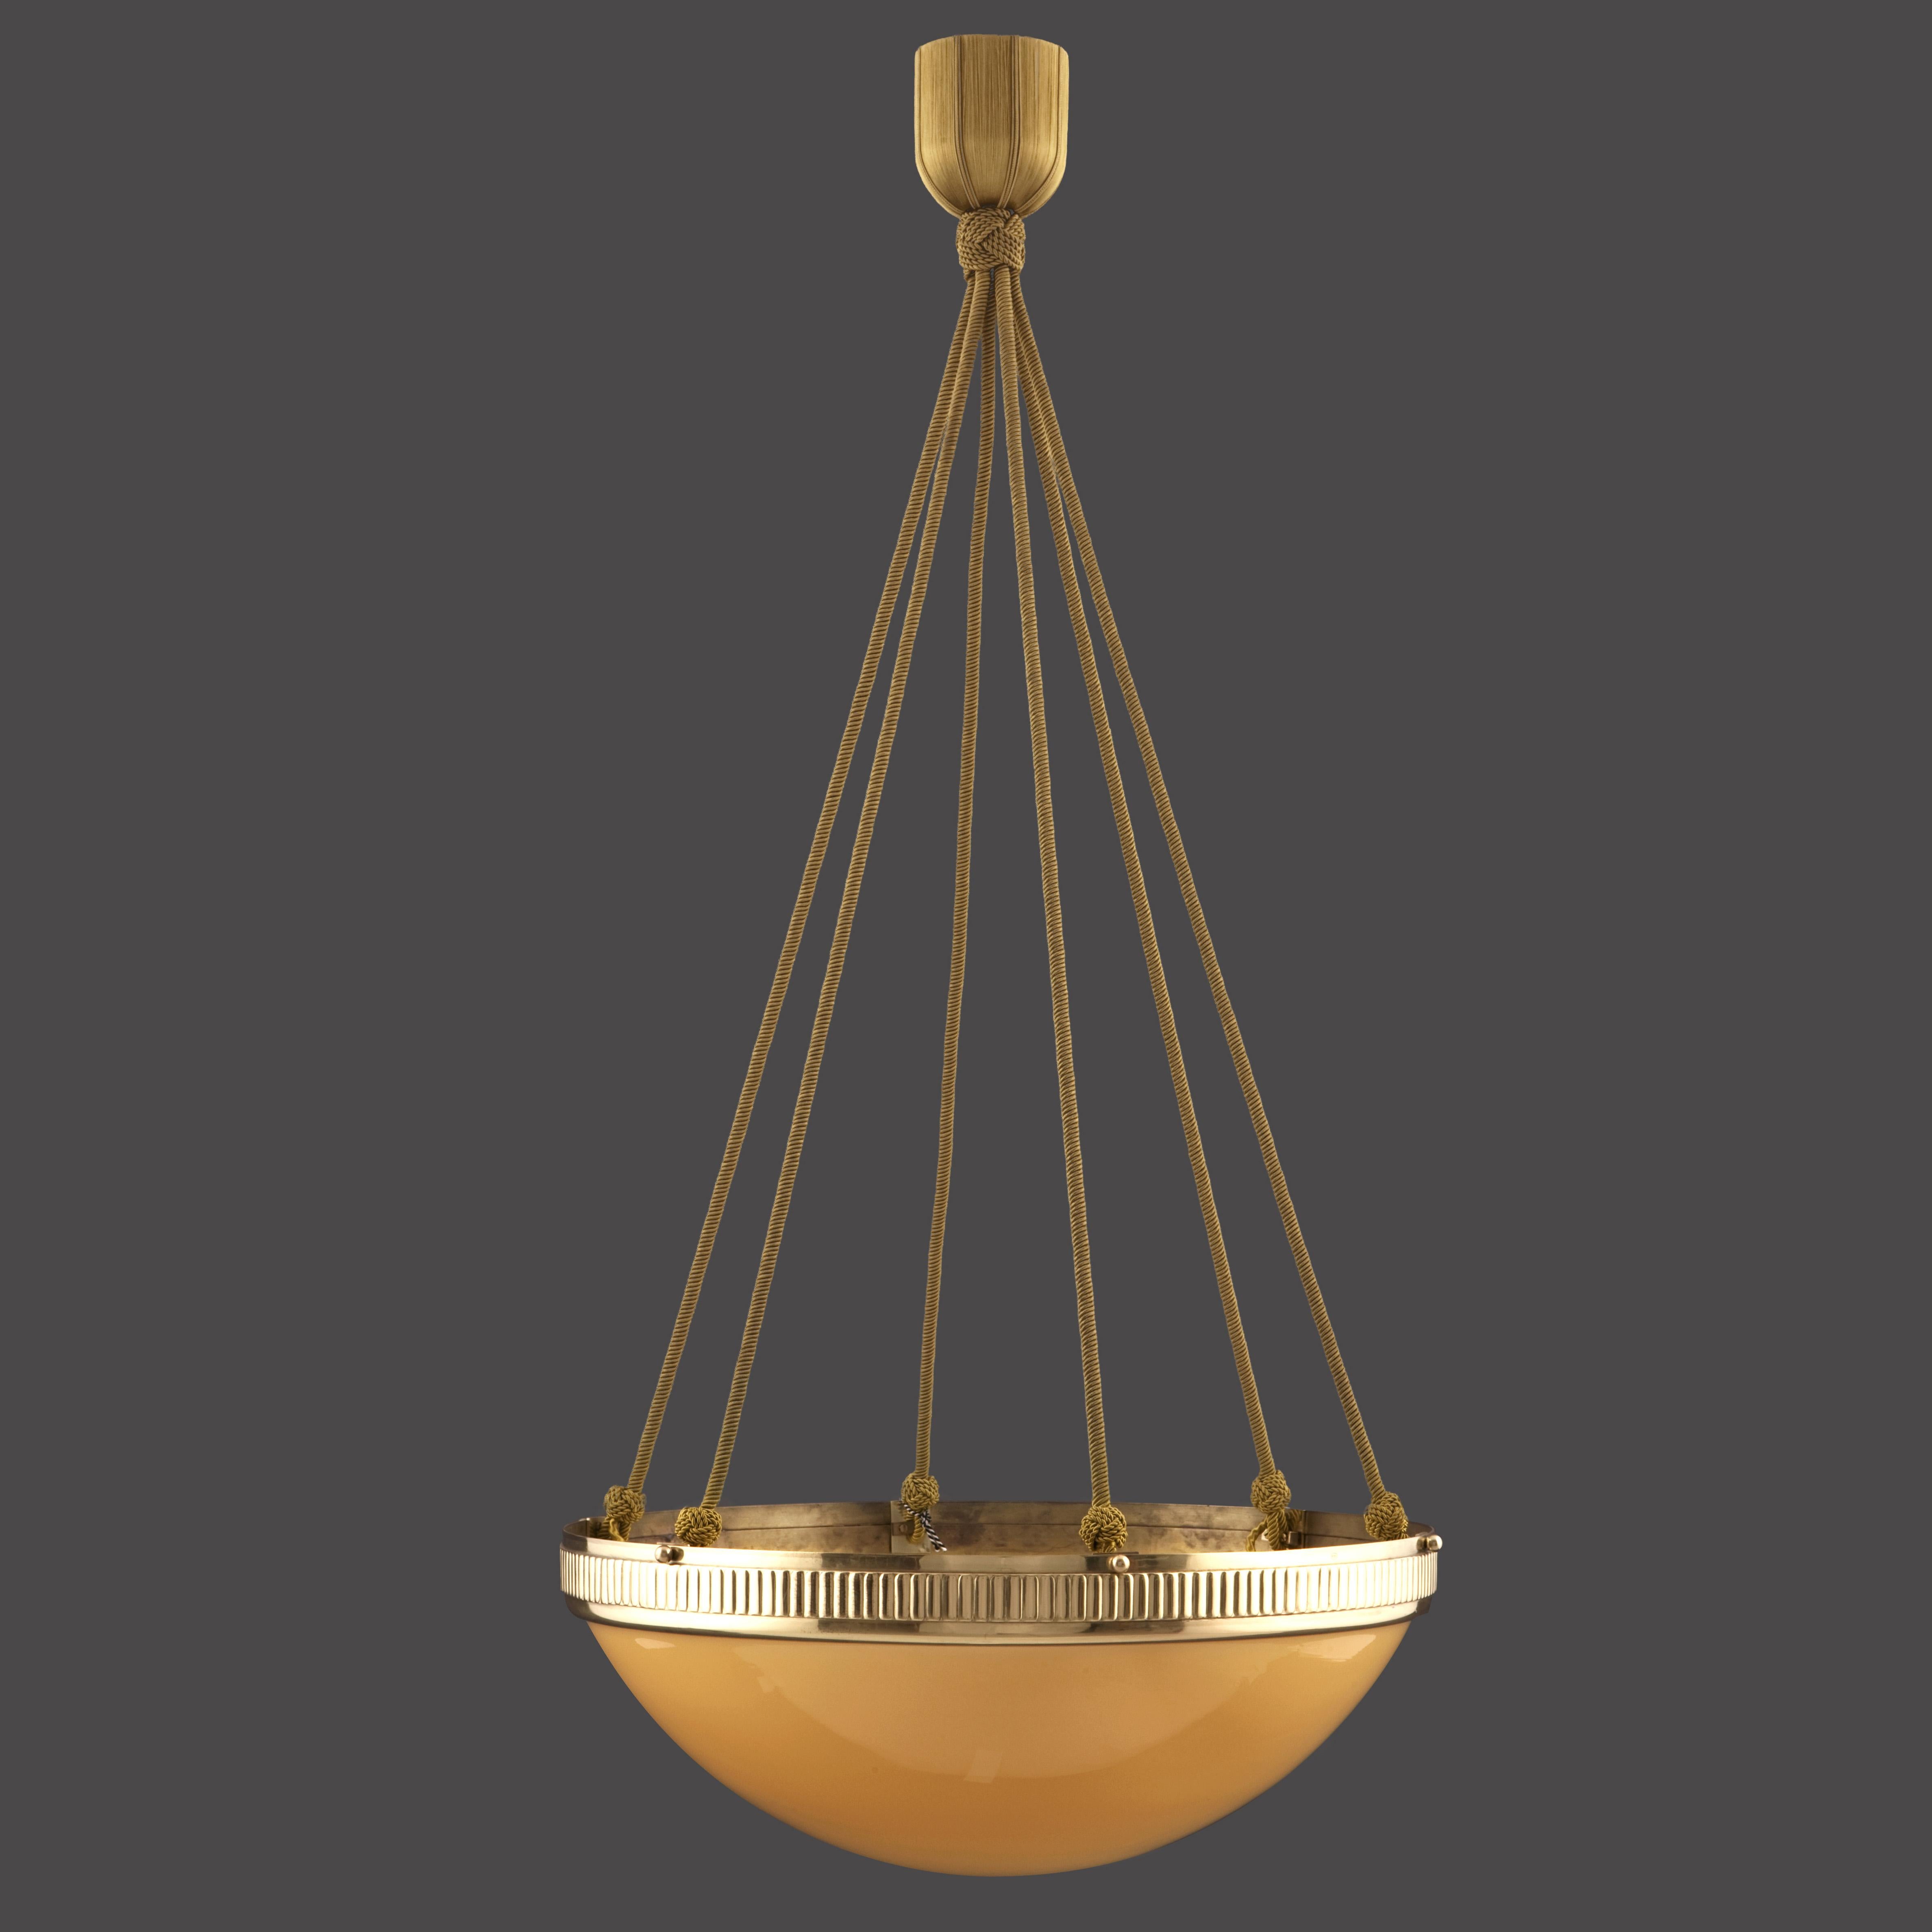 Chandelier with a colored opaline-glass in a handcrafted brass-rim, hanging on works of passementery

Total drop custom

Most components according to the UL regulations, with an additional charge we will UL-list and label our fixtures.